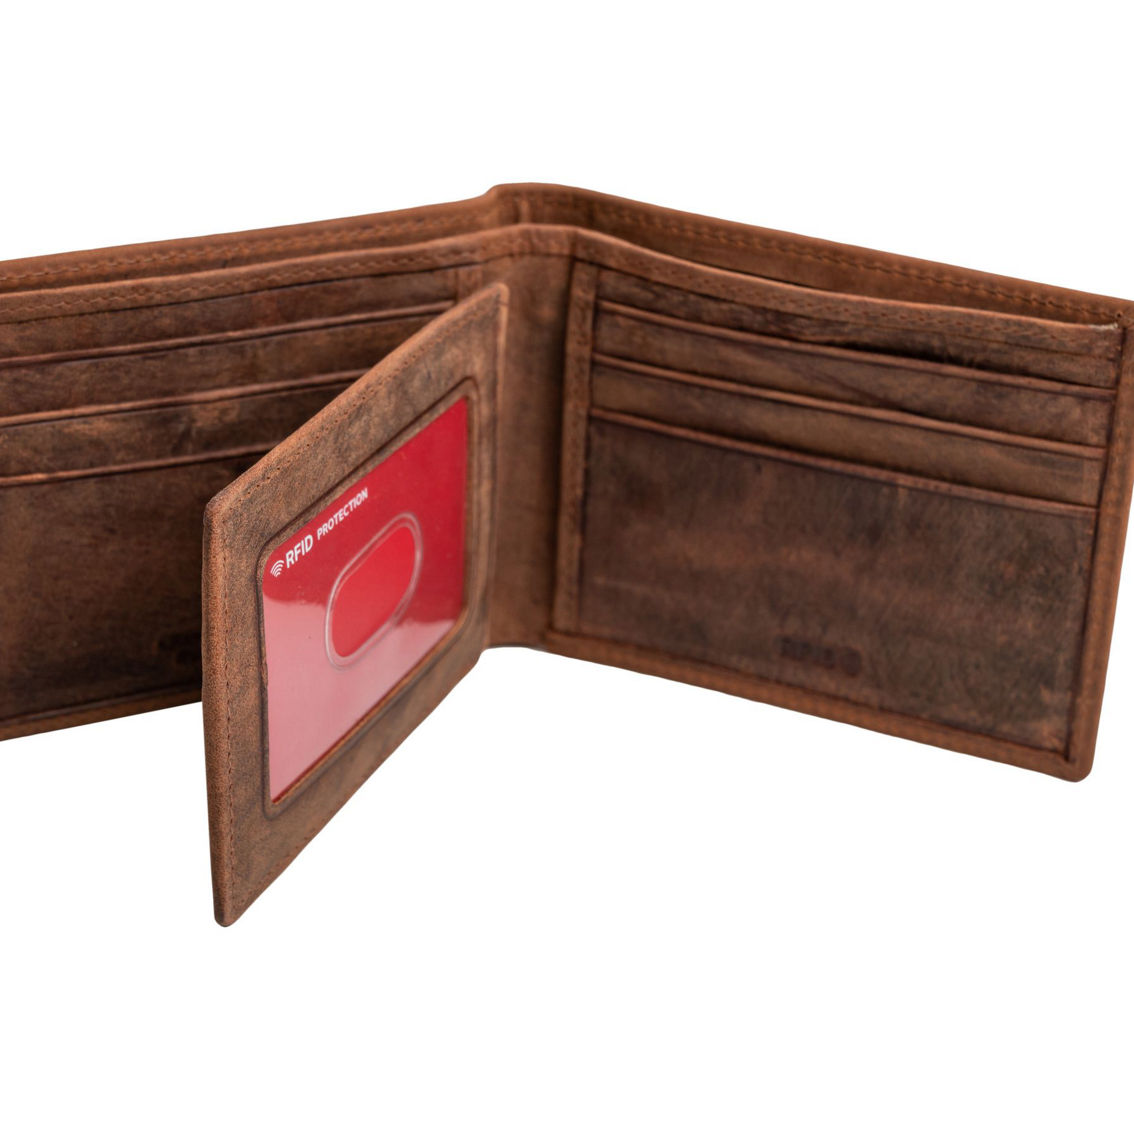 CHAMPS Leather RFID Blocking center-wing wallet in Gift box - Image 3 of 5